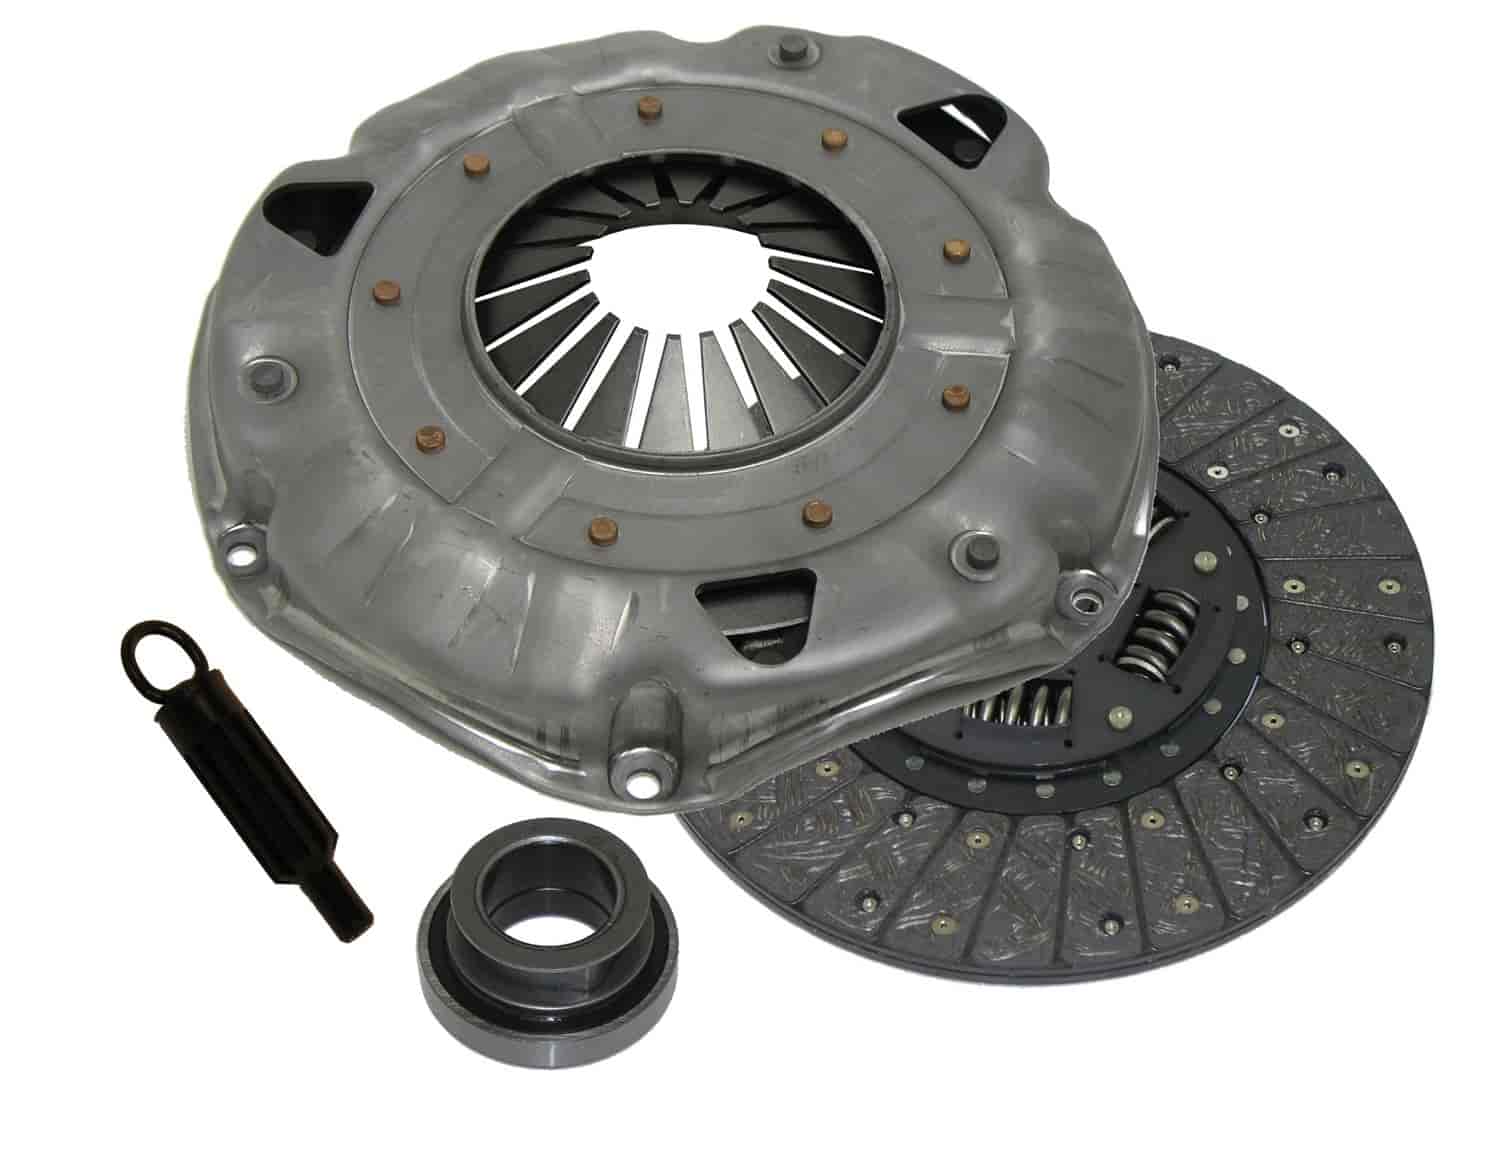 Premium OEM Replacement Clutch Kit 1988-95 GM Full-Size